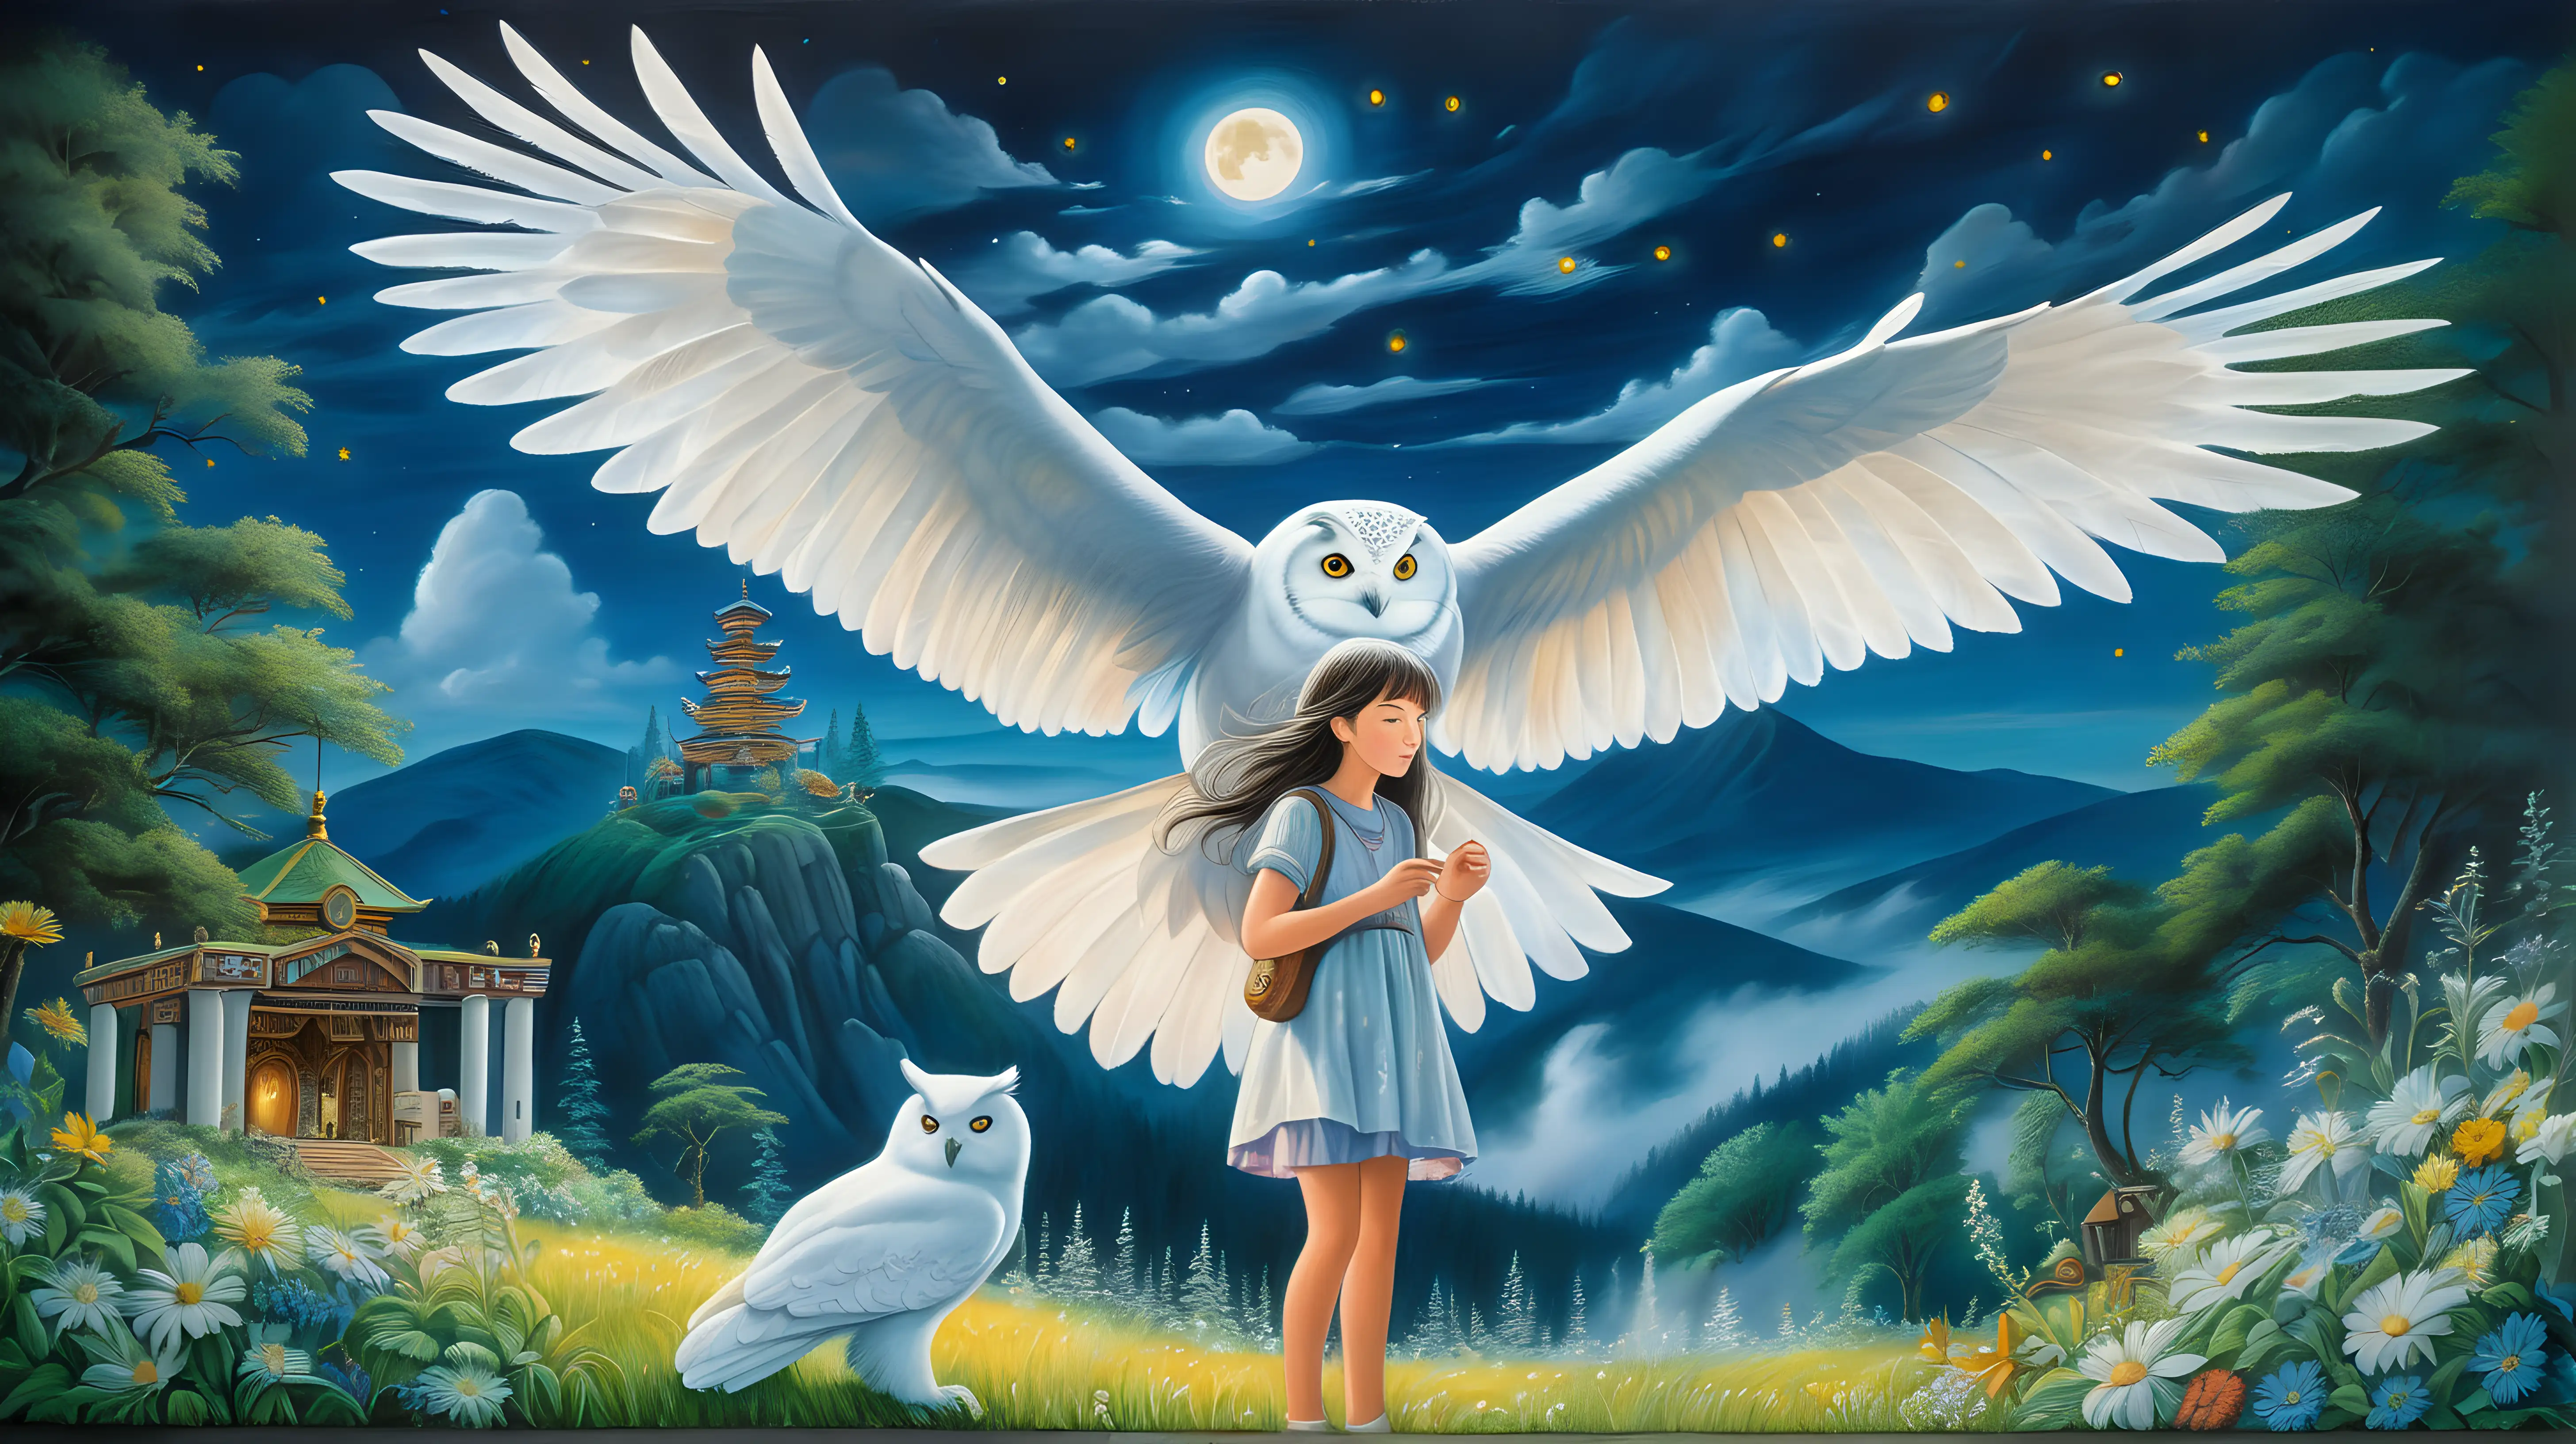 Enchanting SilverHaired Girl with Owl in GhibliInspired Forest